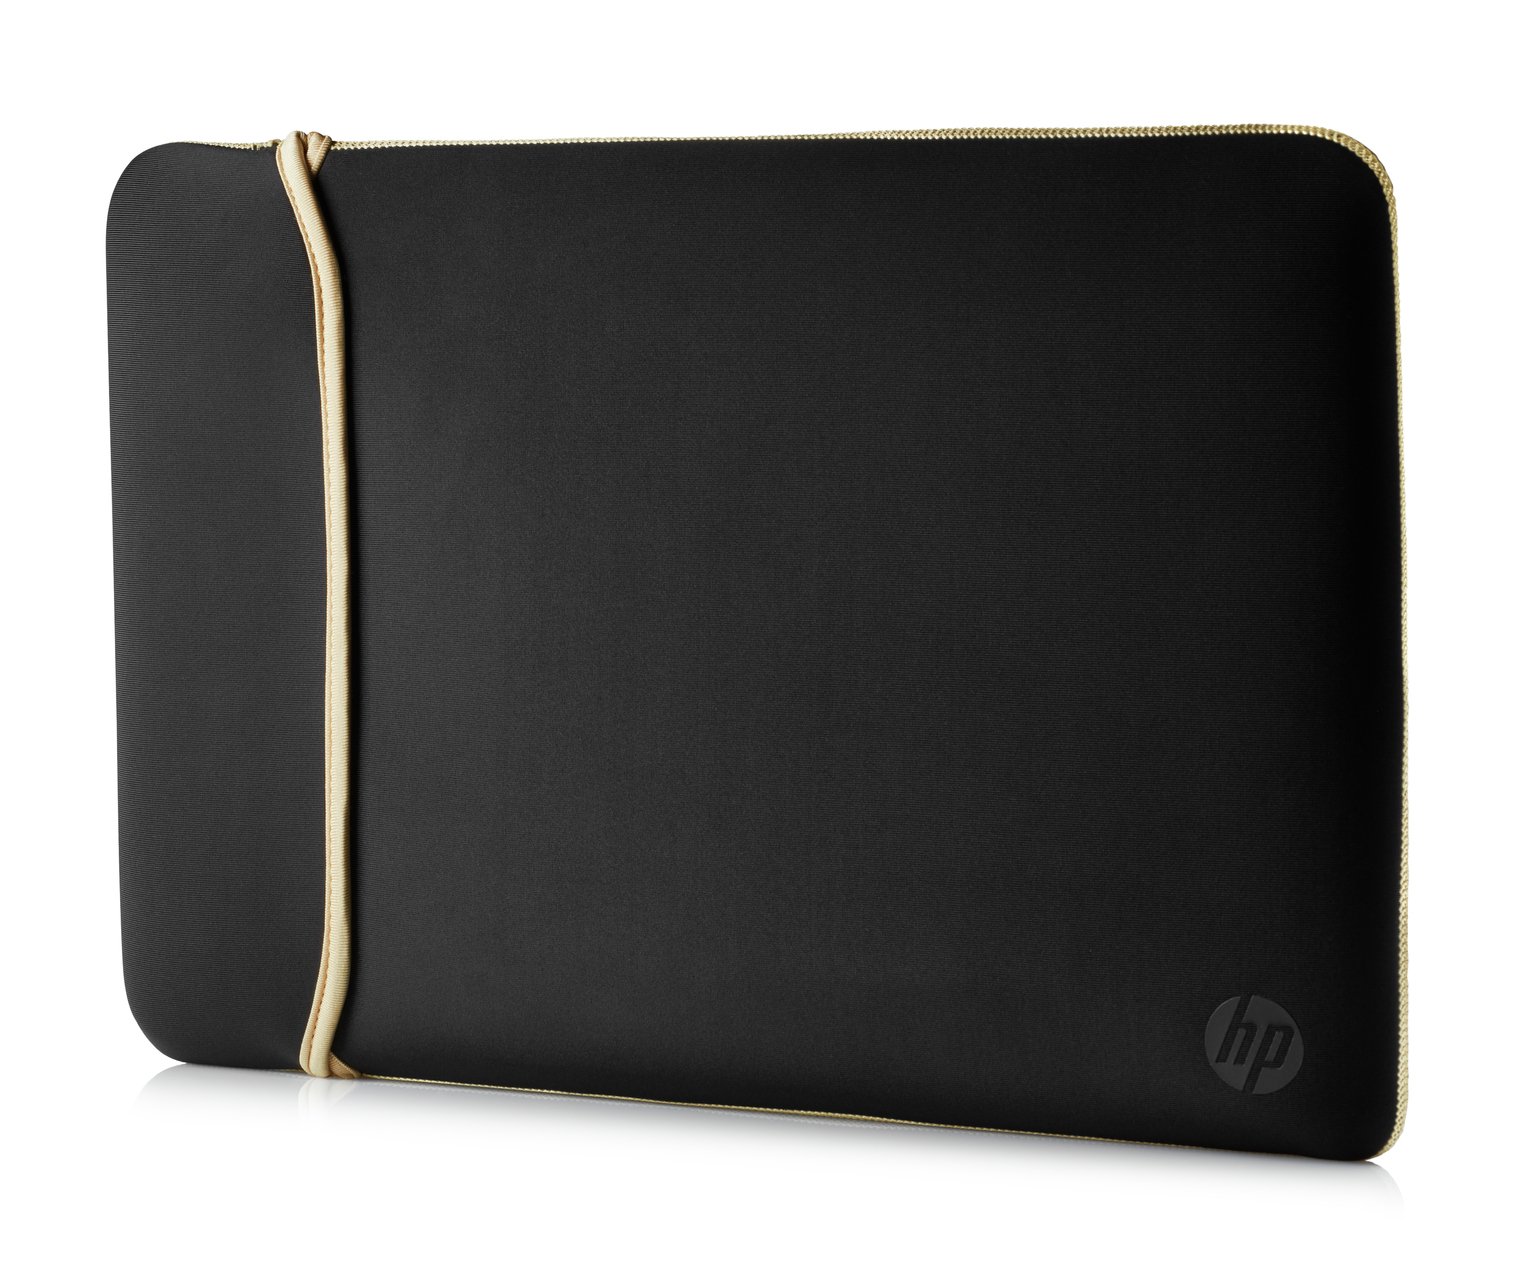 HP 15.6 Inch Reversible Laptop Sleeve Review